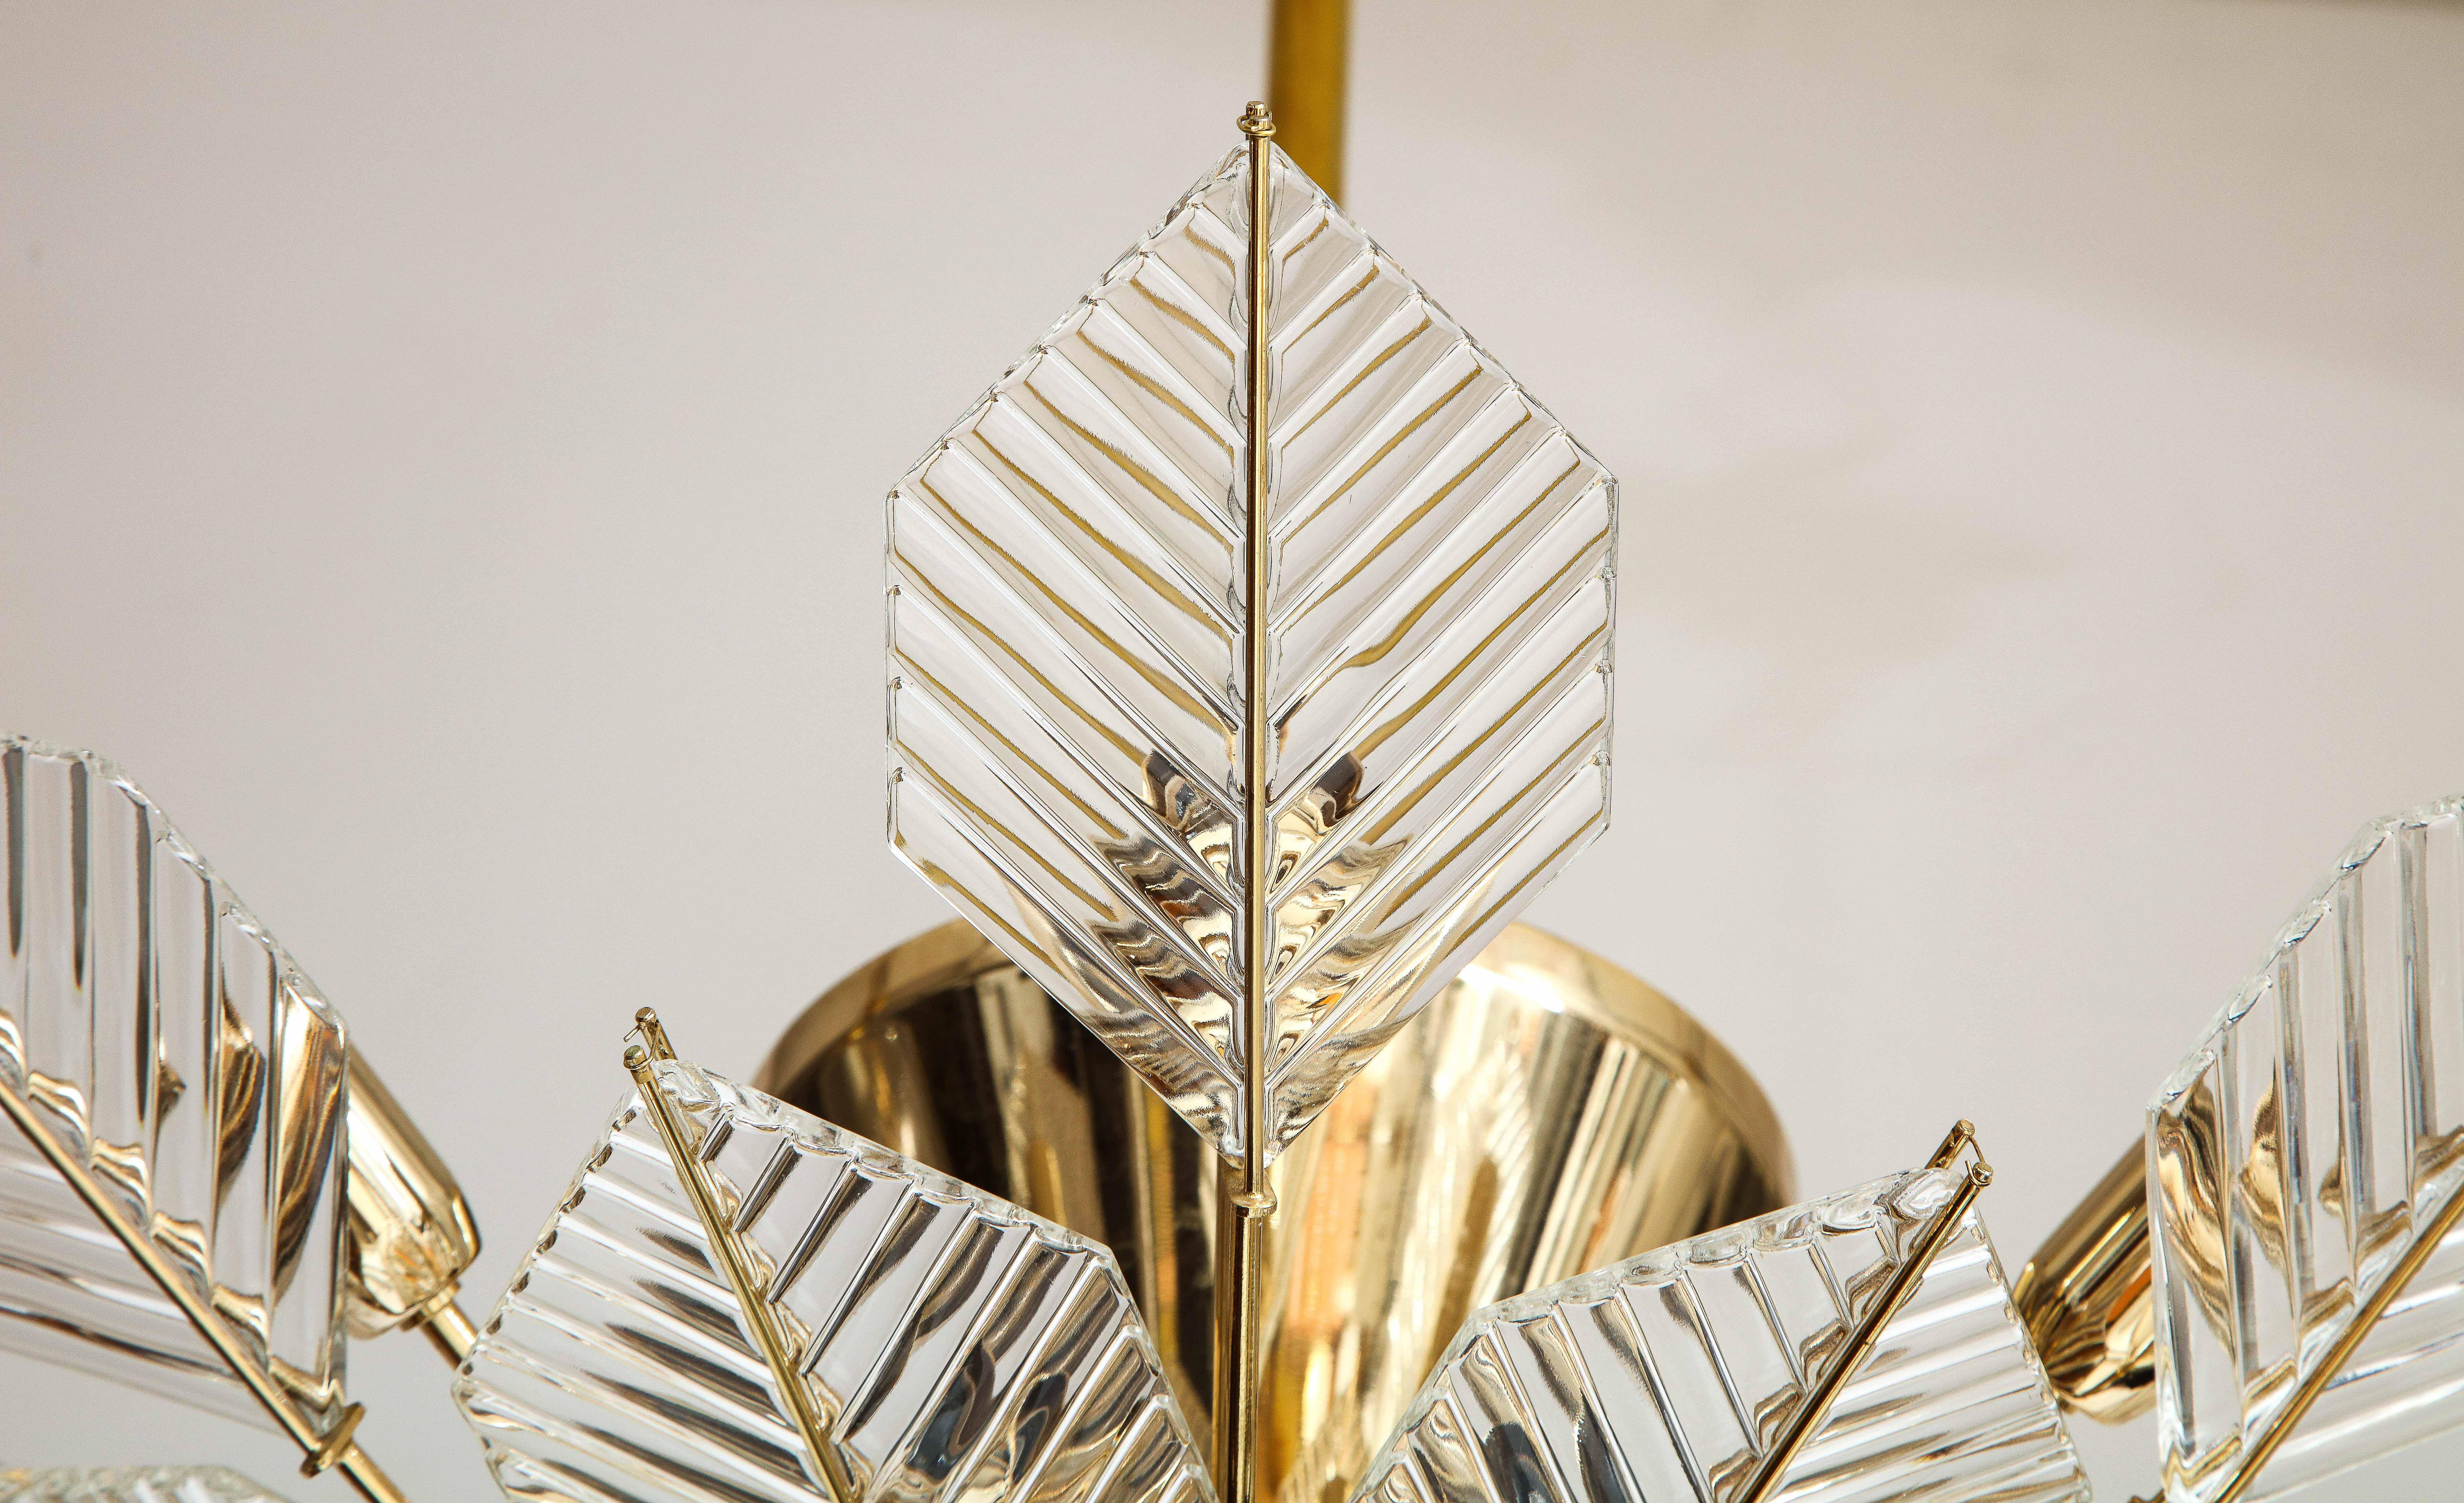 Italian 15 Light Glass Chandelier Decorated with Leaf Motif, La Murrina, 1970's For Sale 4